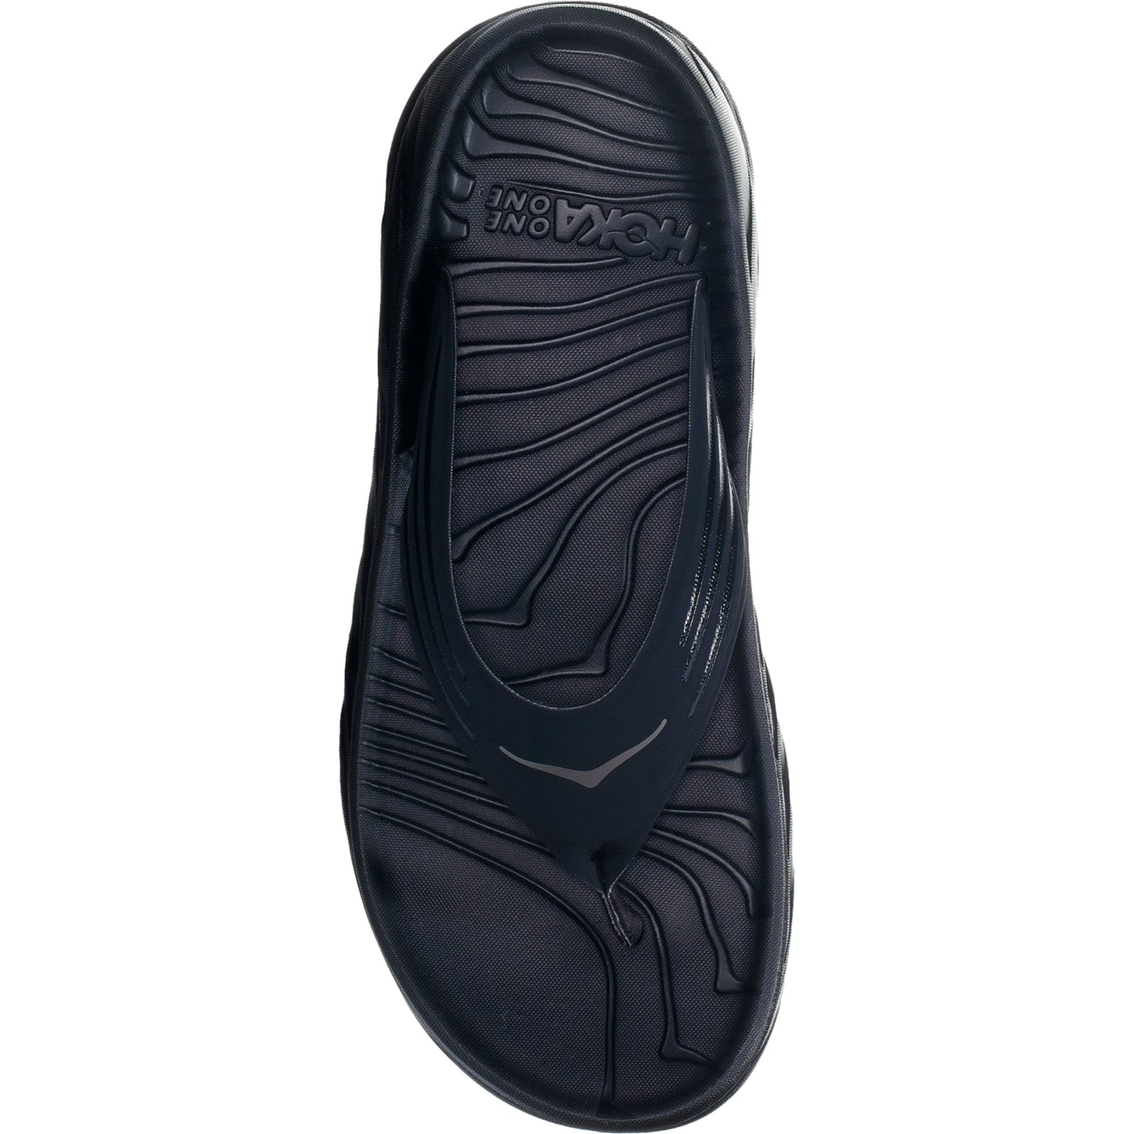 Hoka Men's Ora Recovery Flip Flop Shoes - Image 5 of 6